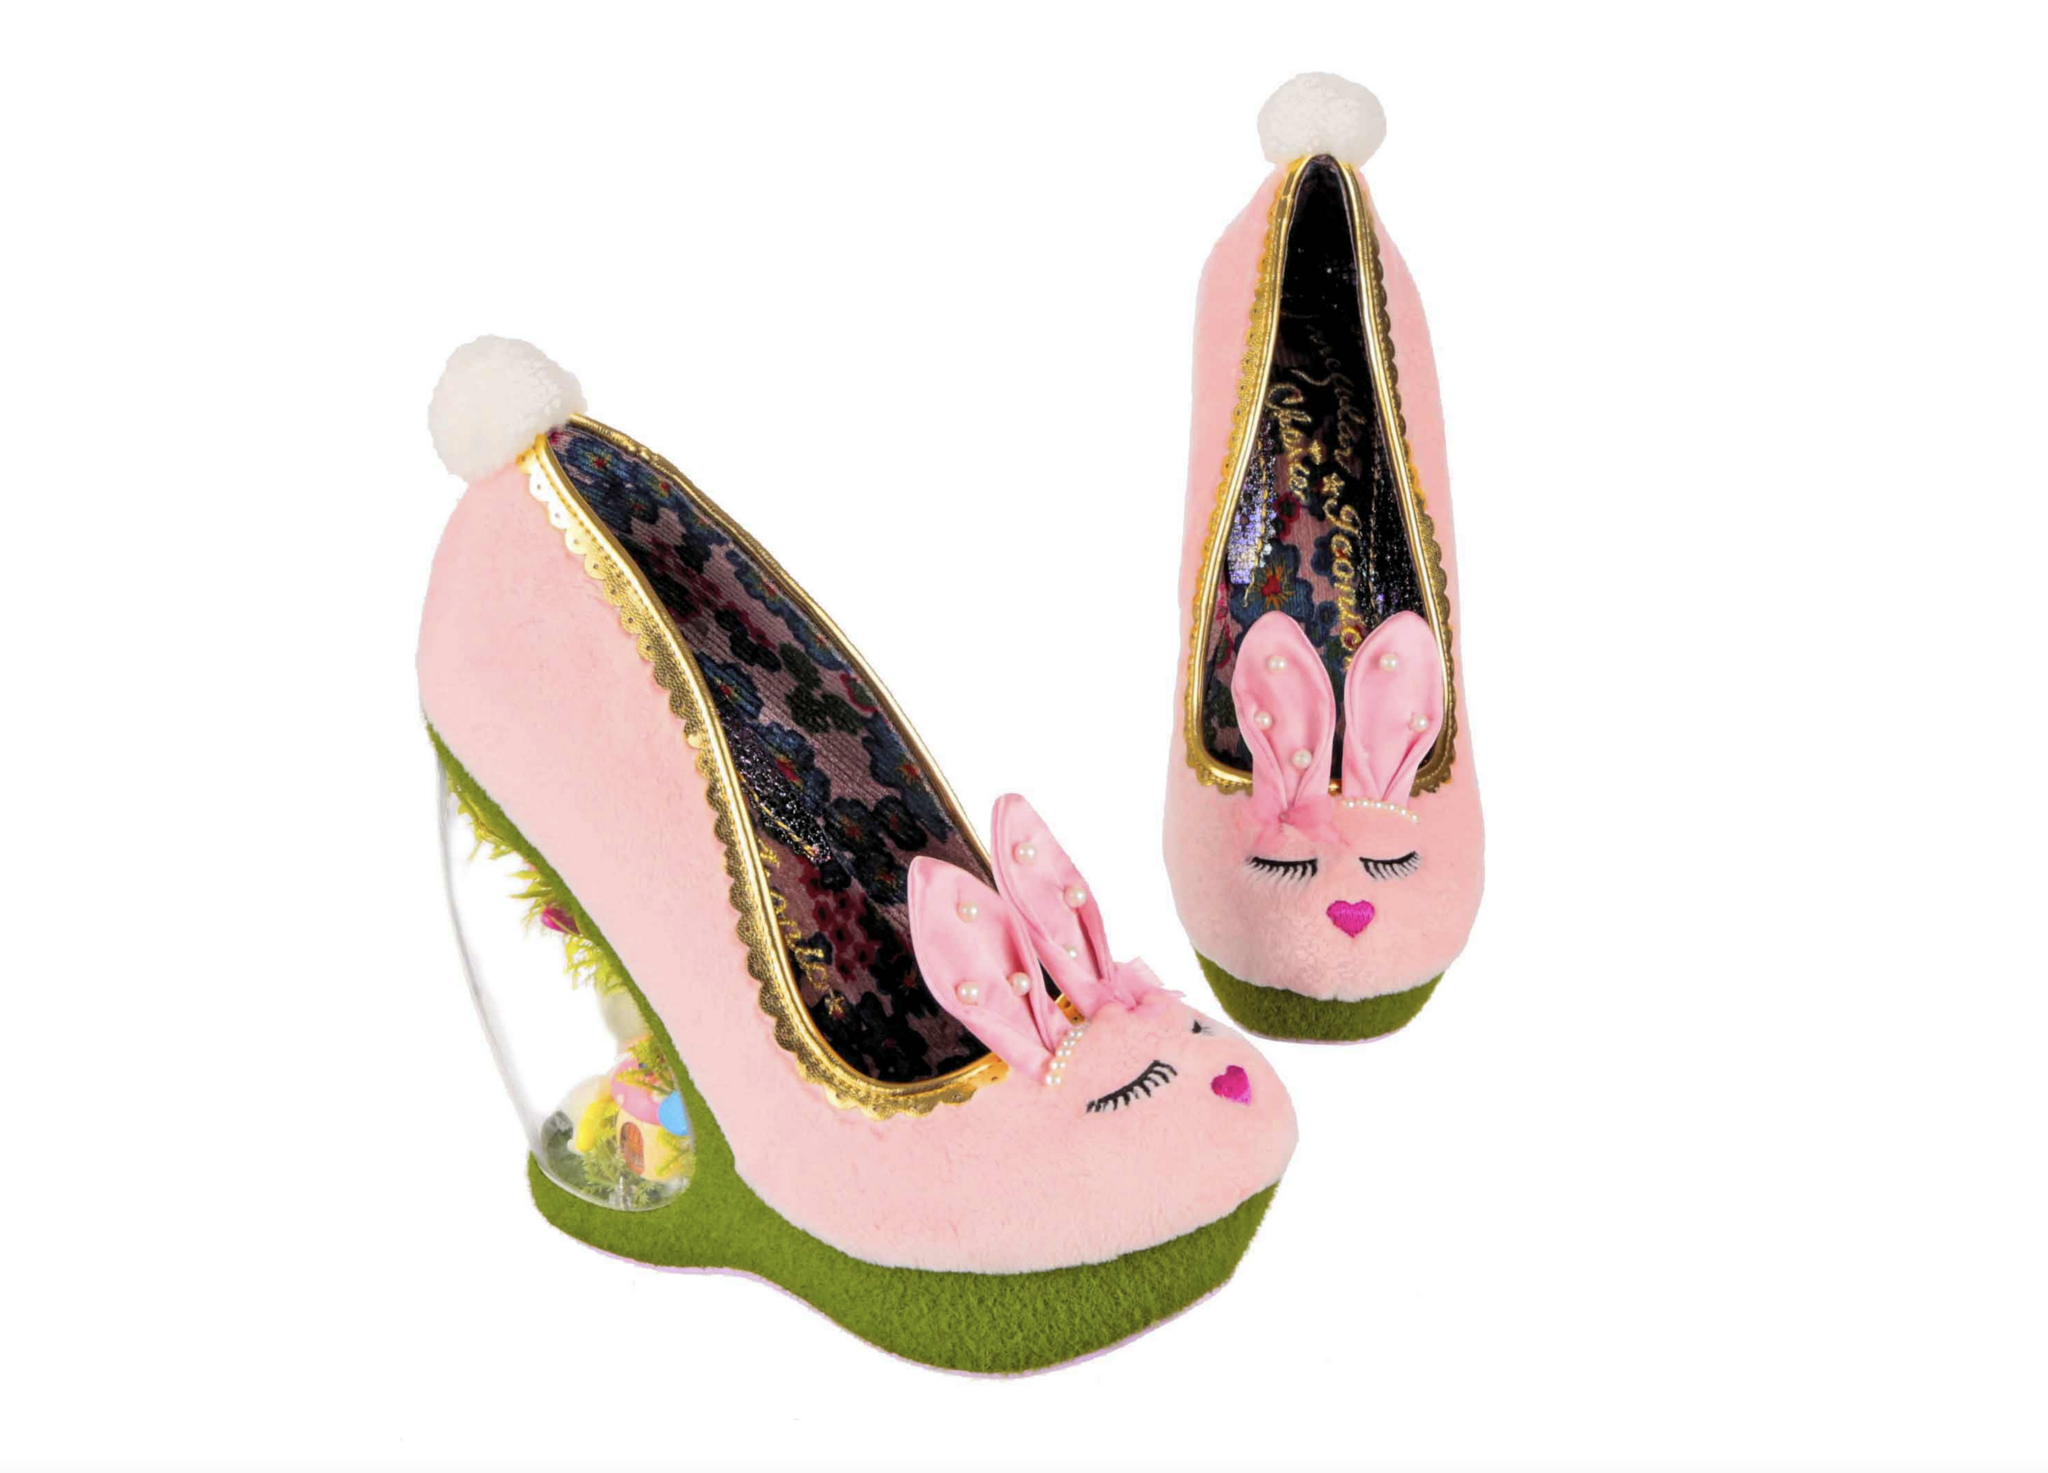 Shop Irregular Choice Oz Shoes - Blue/Purple ✓Free Sitewide Shipping  ✓Bombshell-store.com